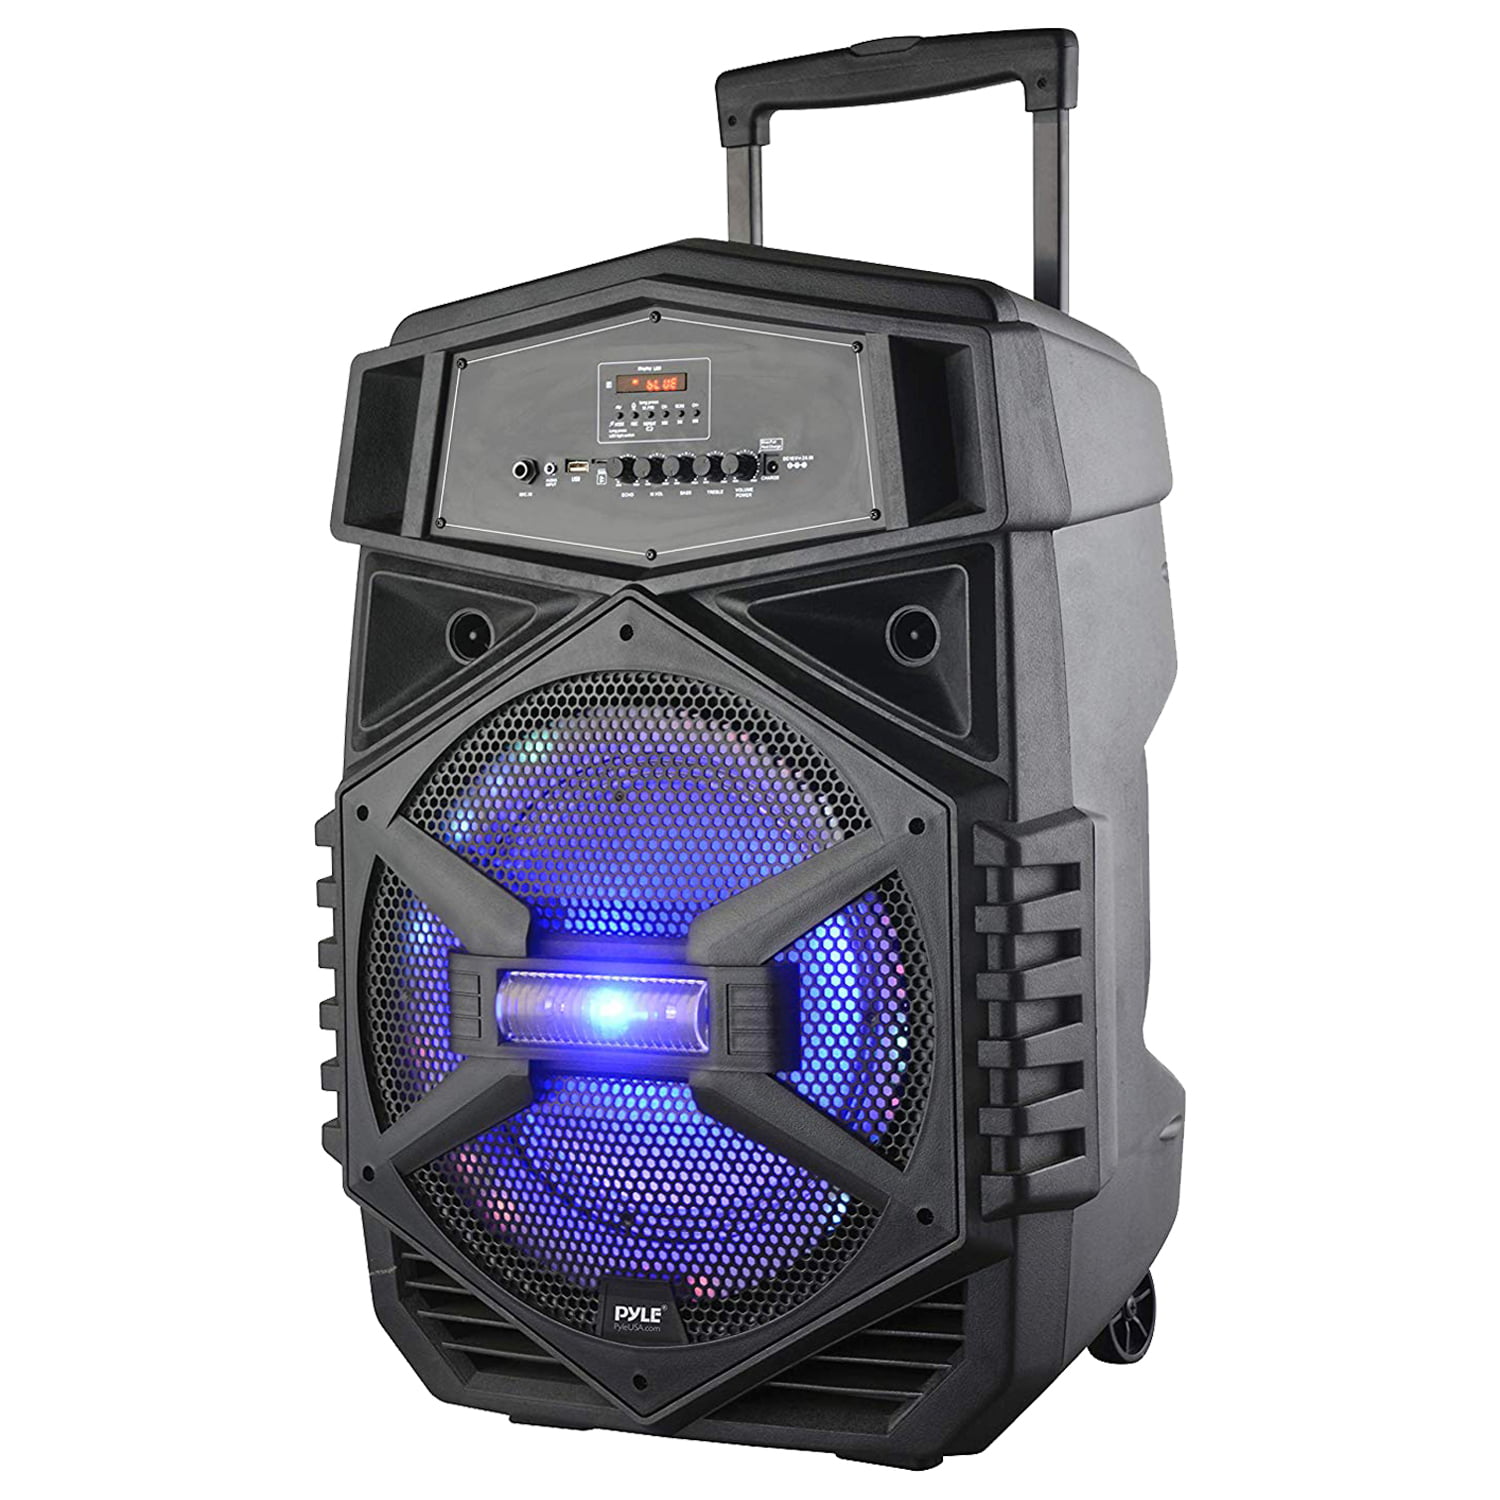 Pyle 12 inch Portable Bluetooth PA Speaker System with LED Lights, USB